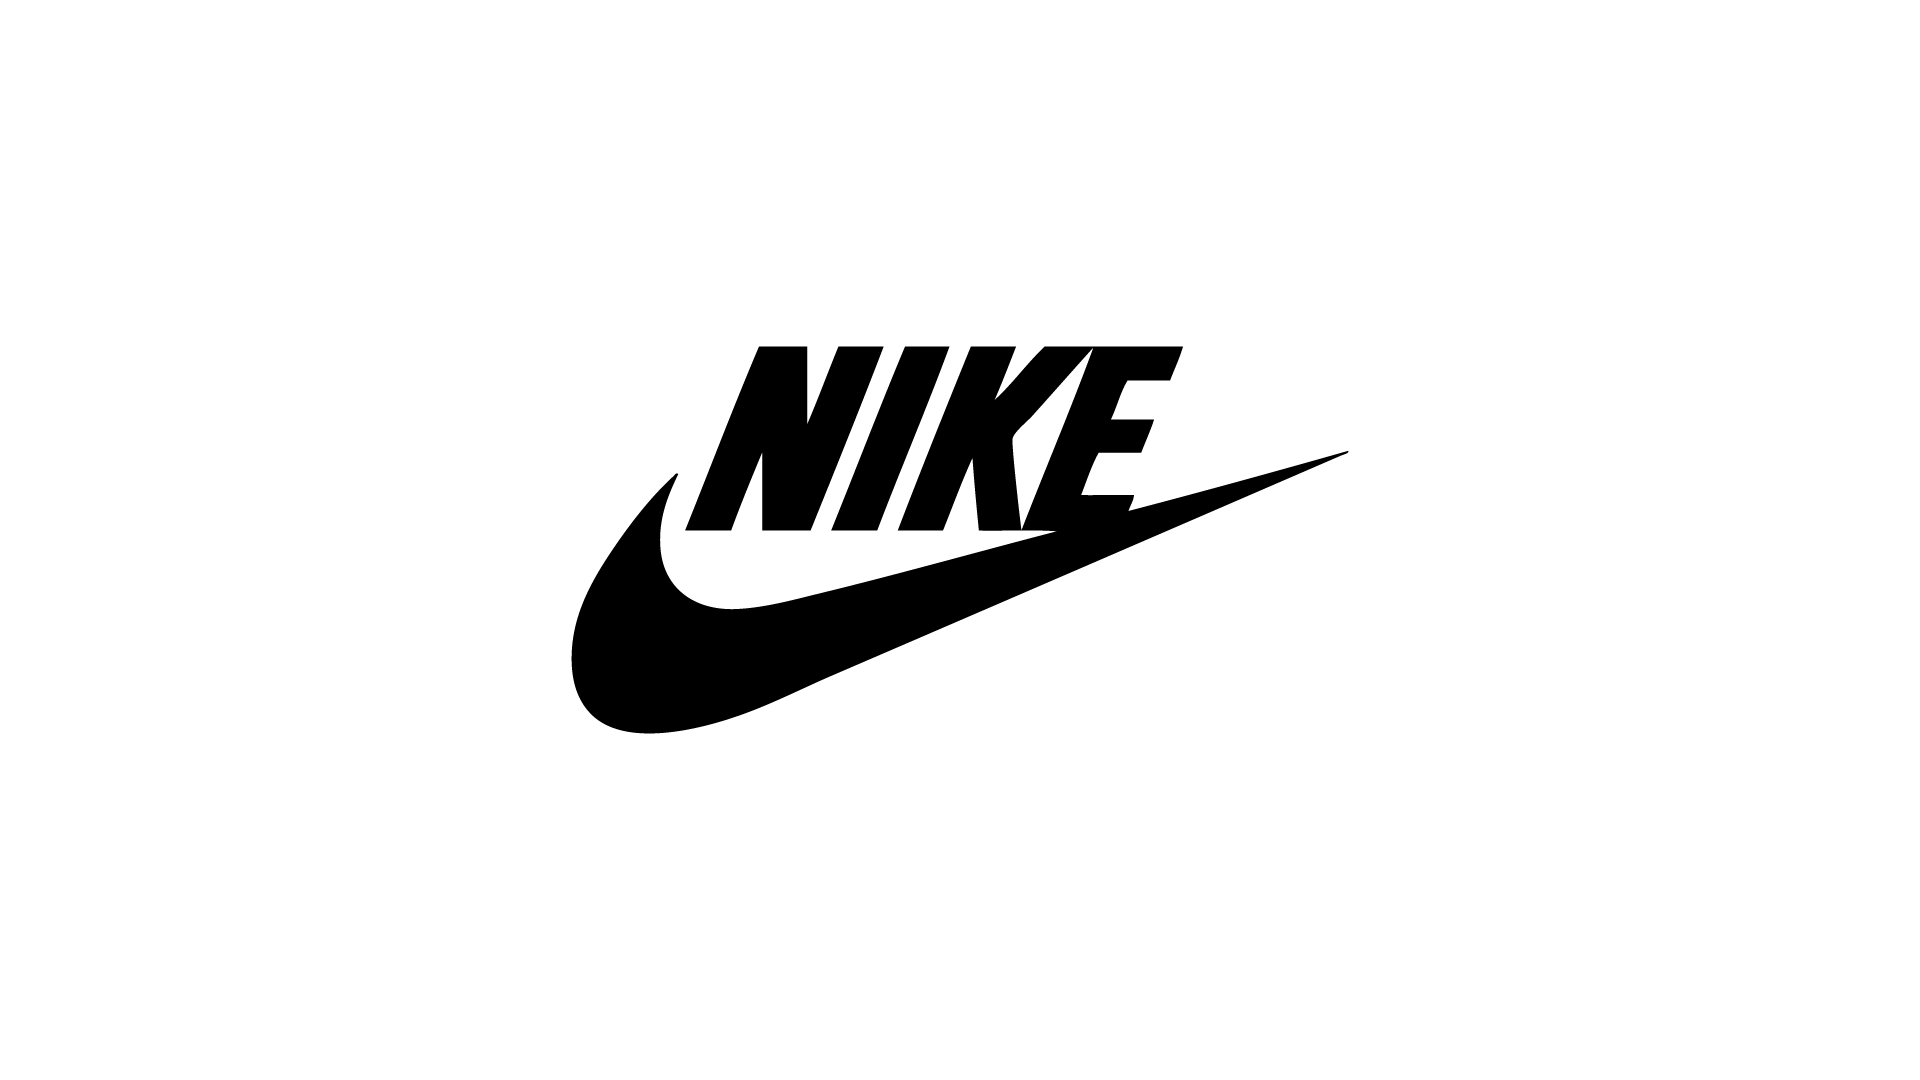 Nike Wallpapers | Nike Logo, Swoosh, Just Do It, and More